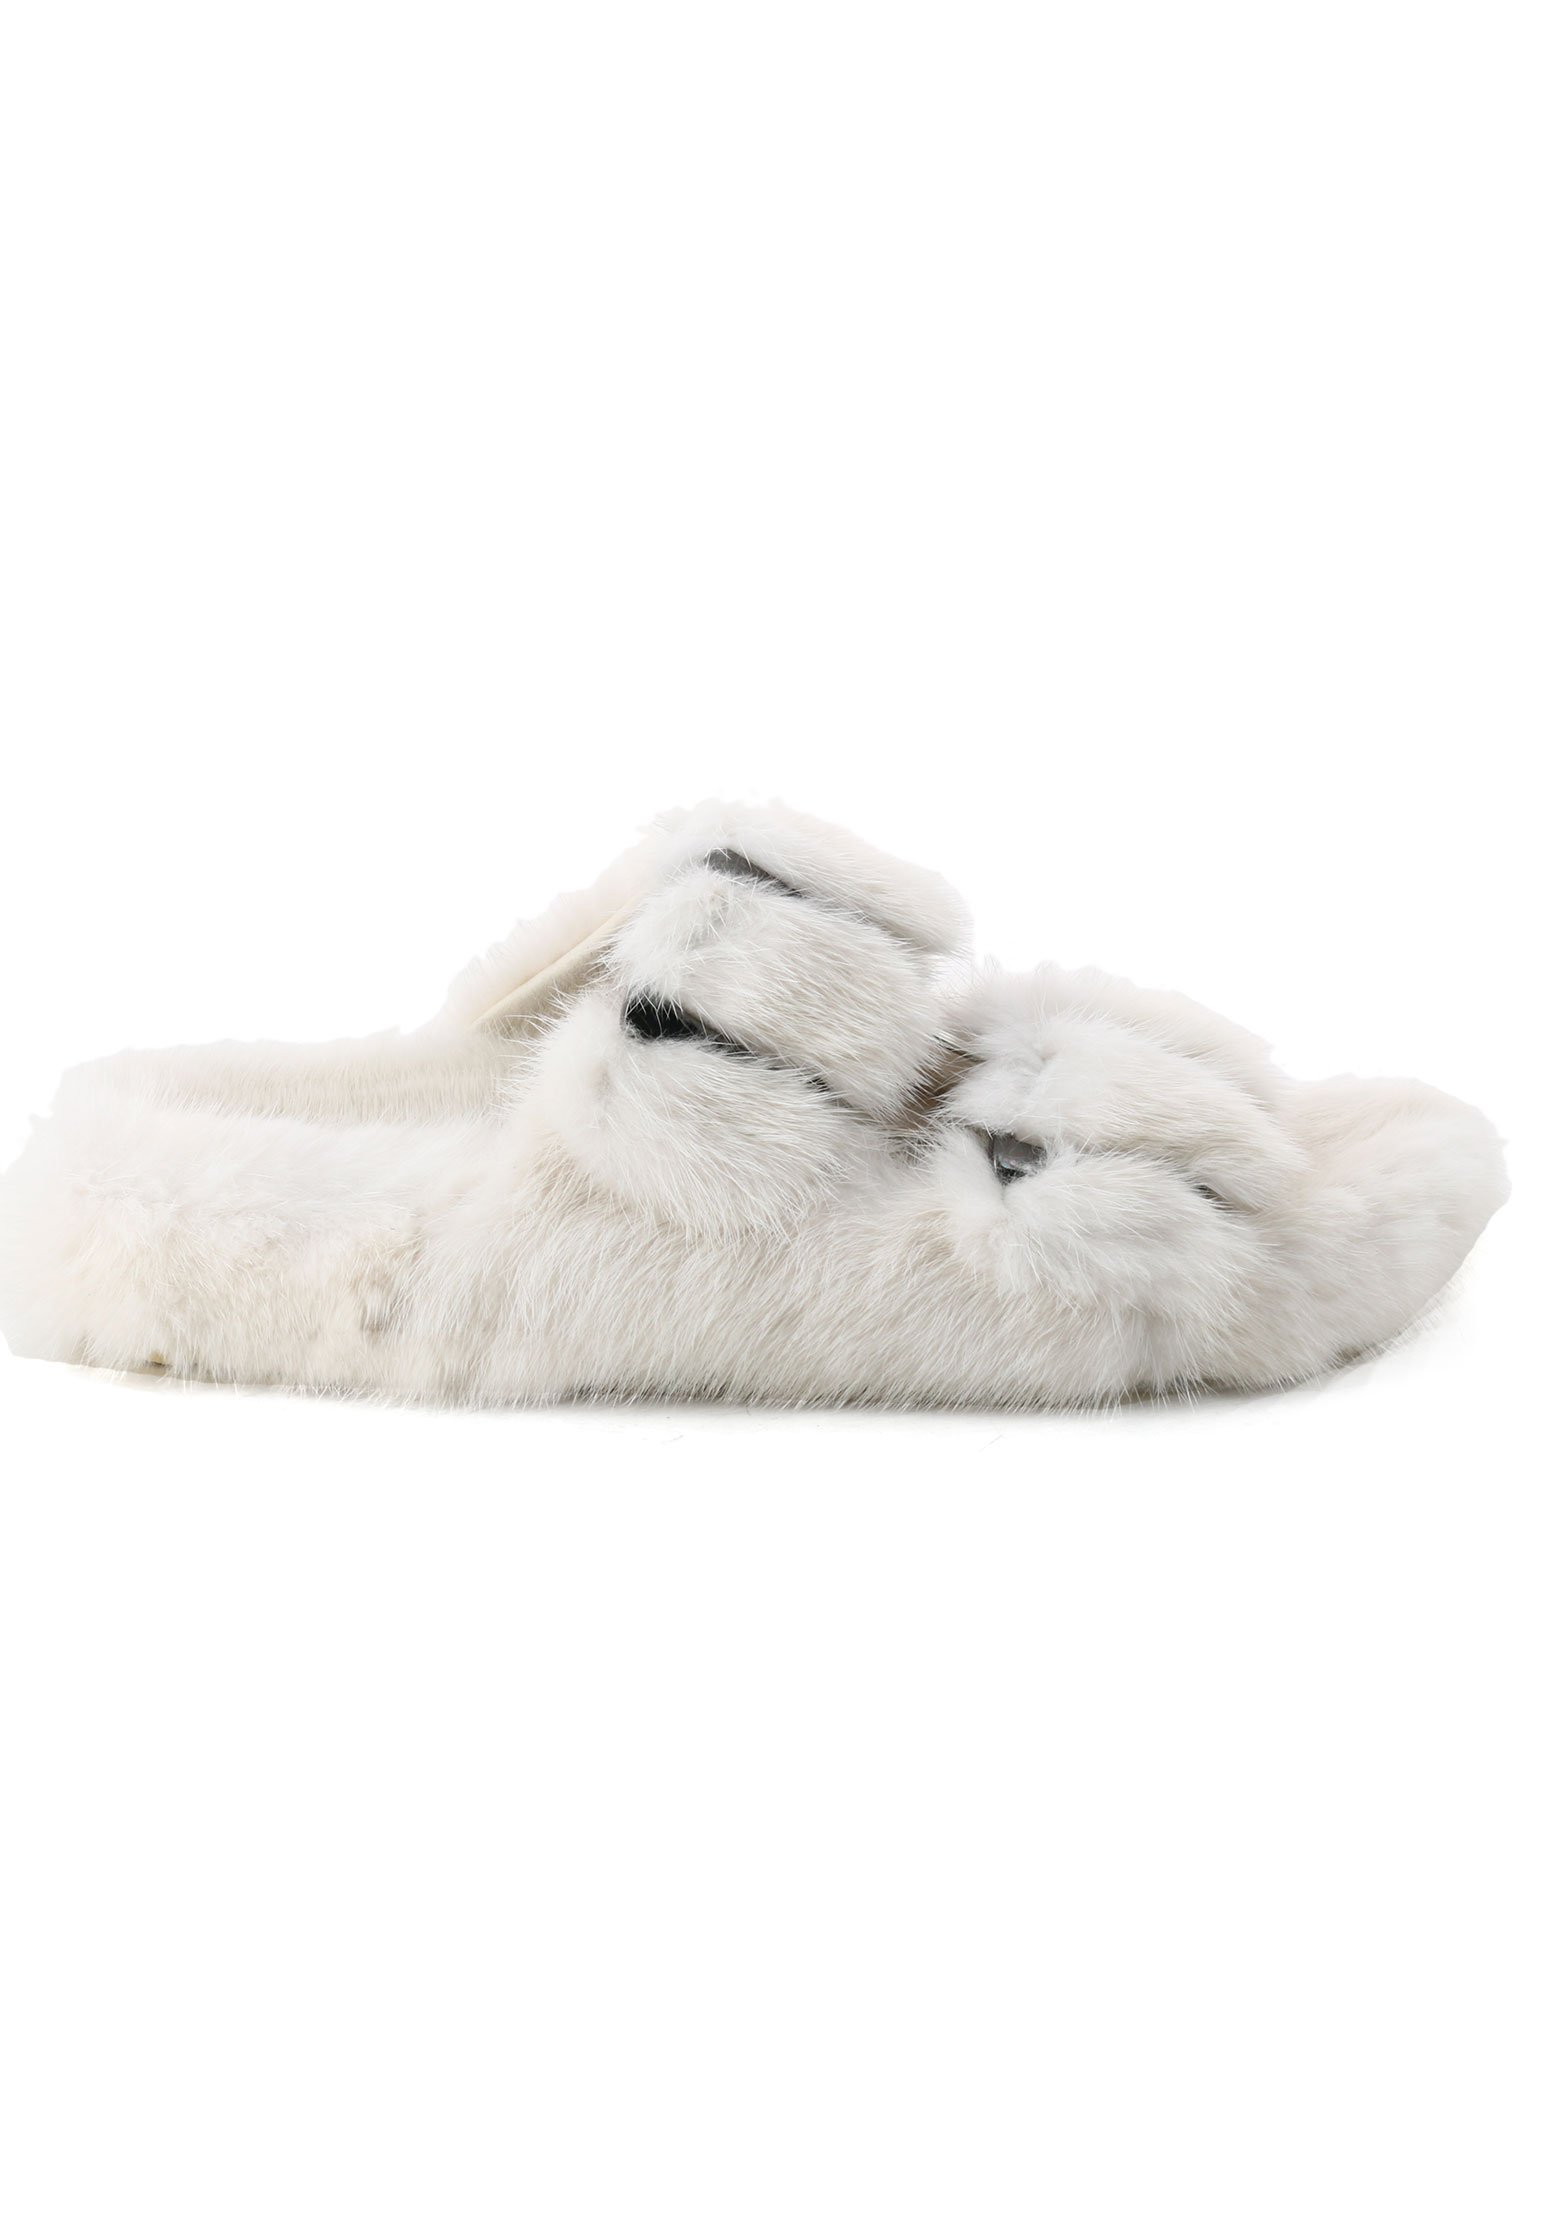 Slippers SAM RONE Color: white (Code: 217) in online store Allure